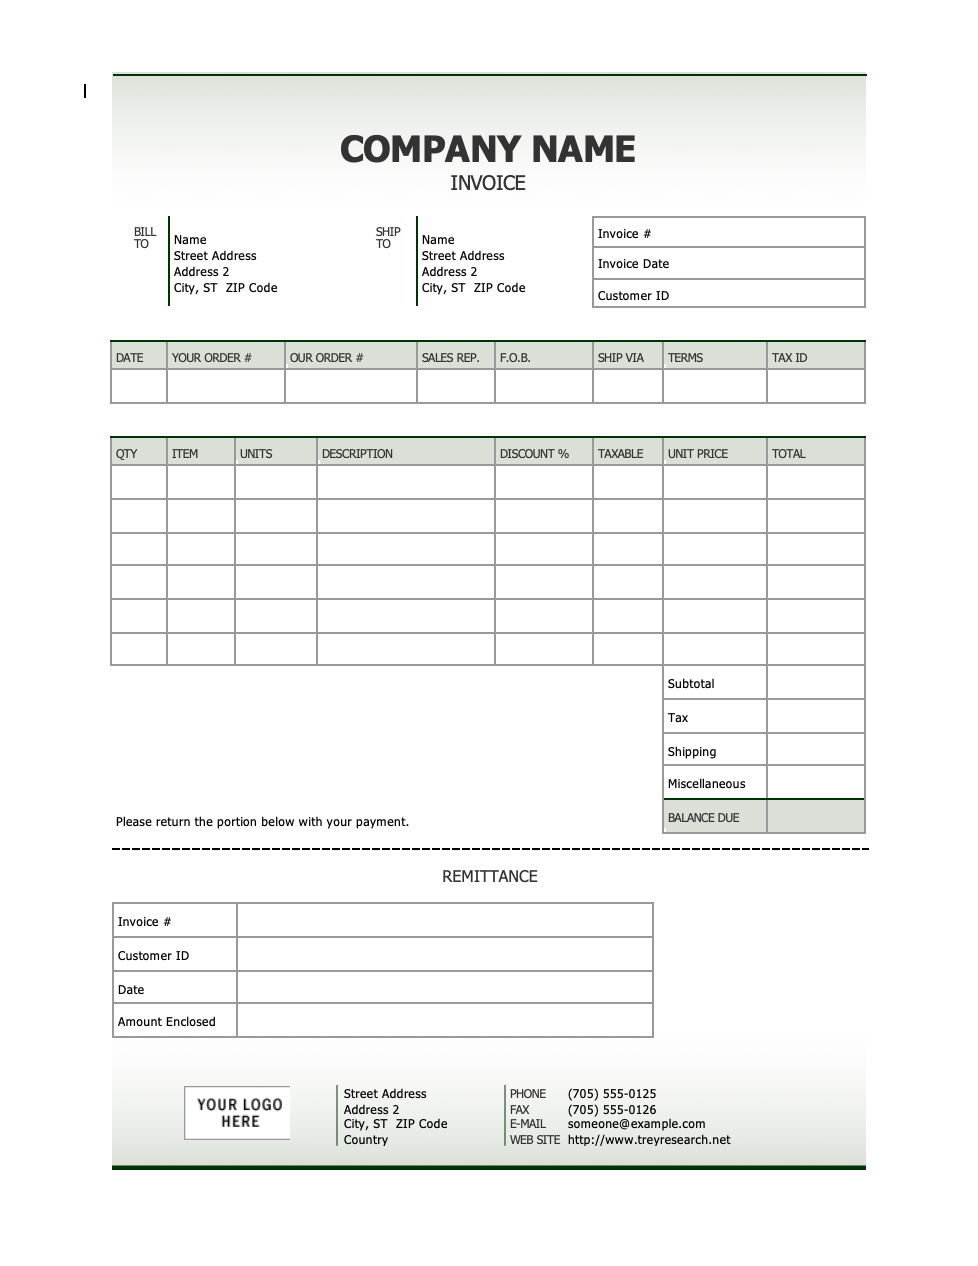 15 Professional Grade Free Invoice Templates For Ms Word 3758